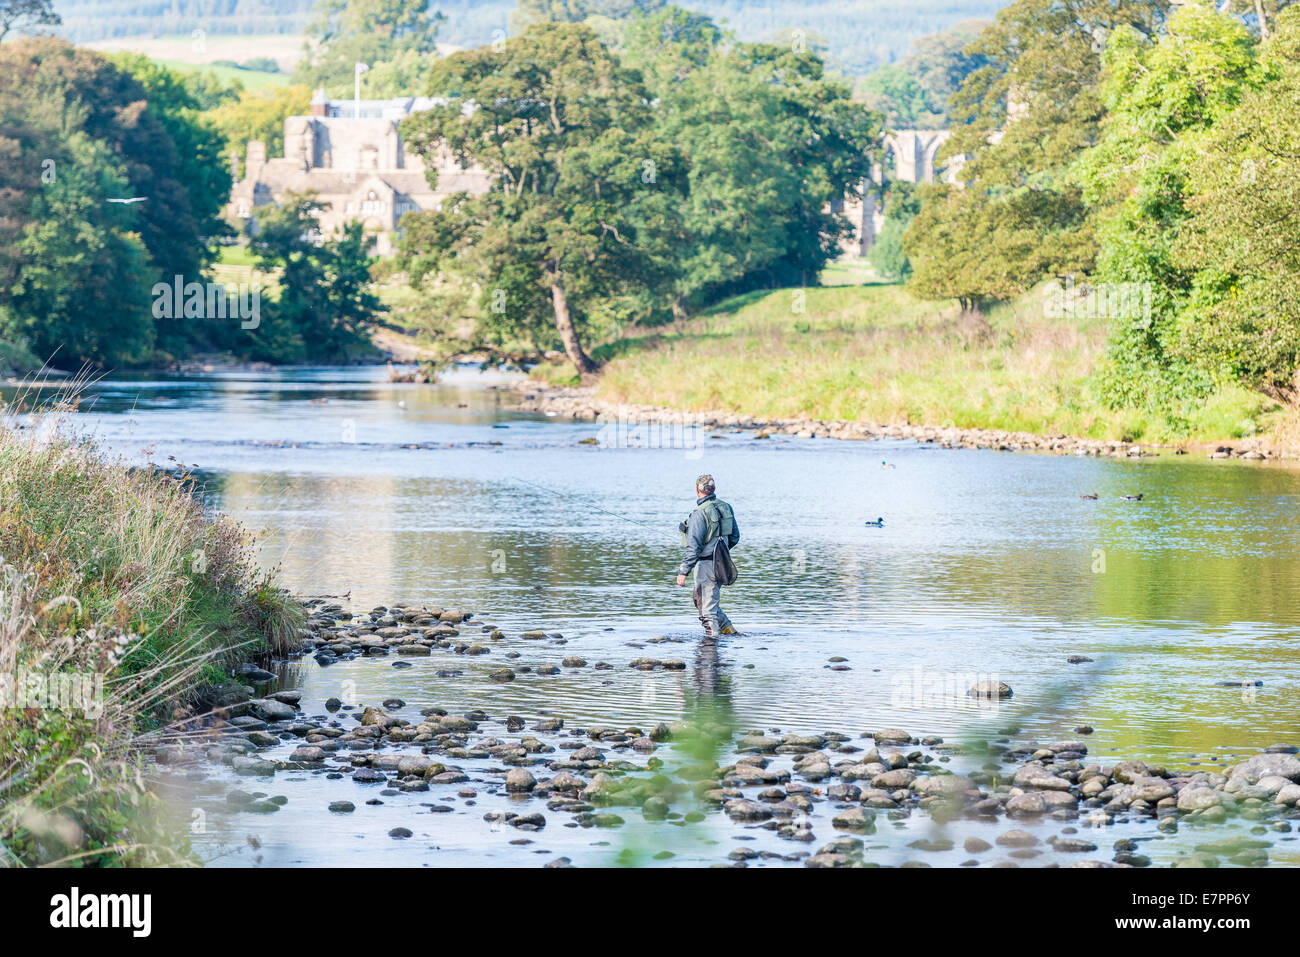 Fly fisherman angler in the River Wharfe with Bolton Abbey in the distance. Stock Photo